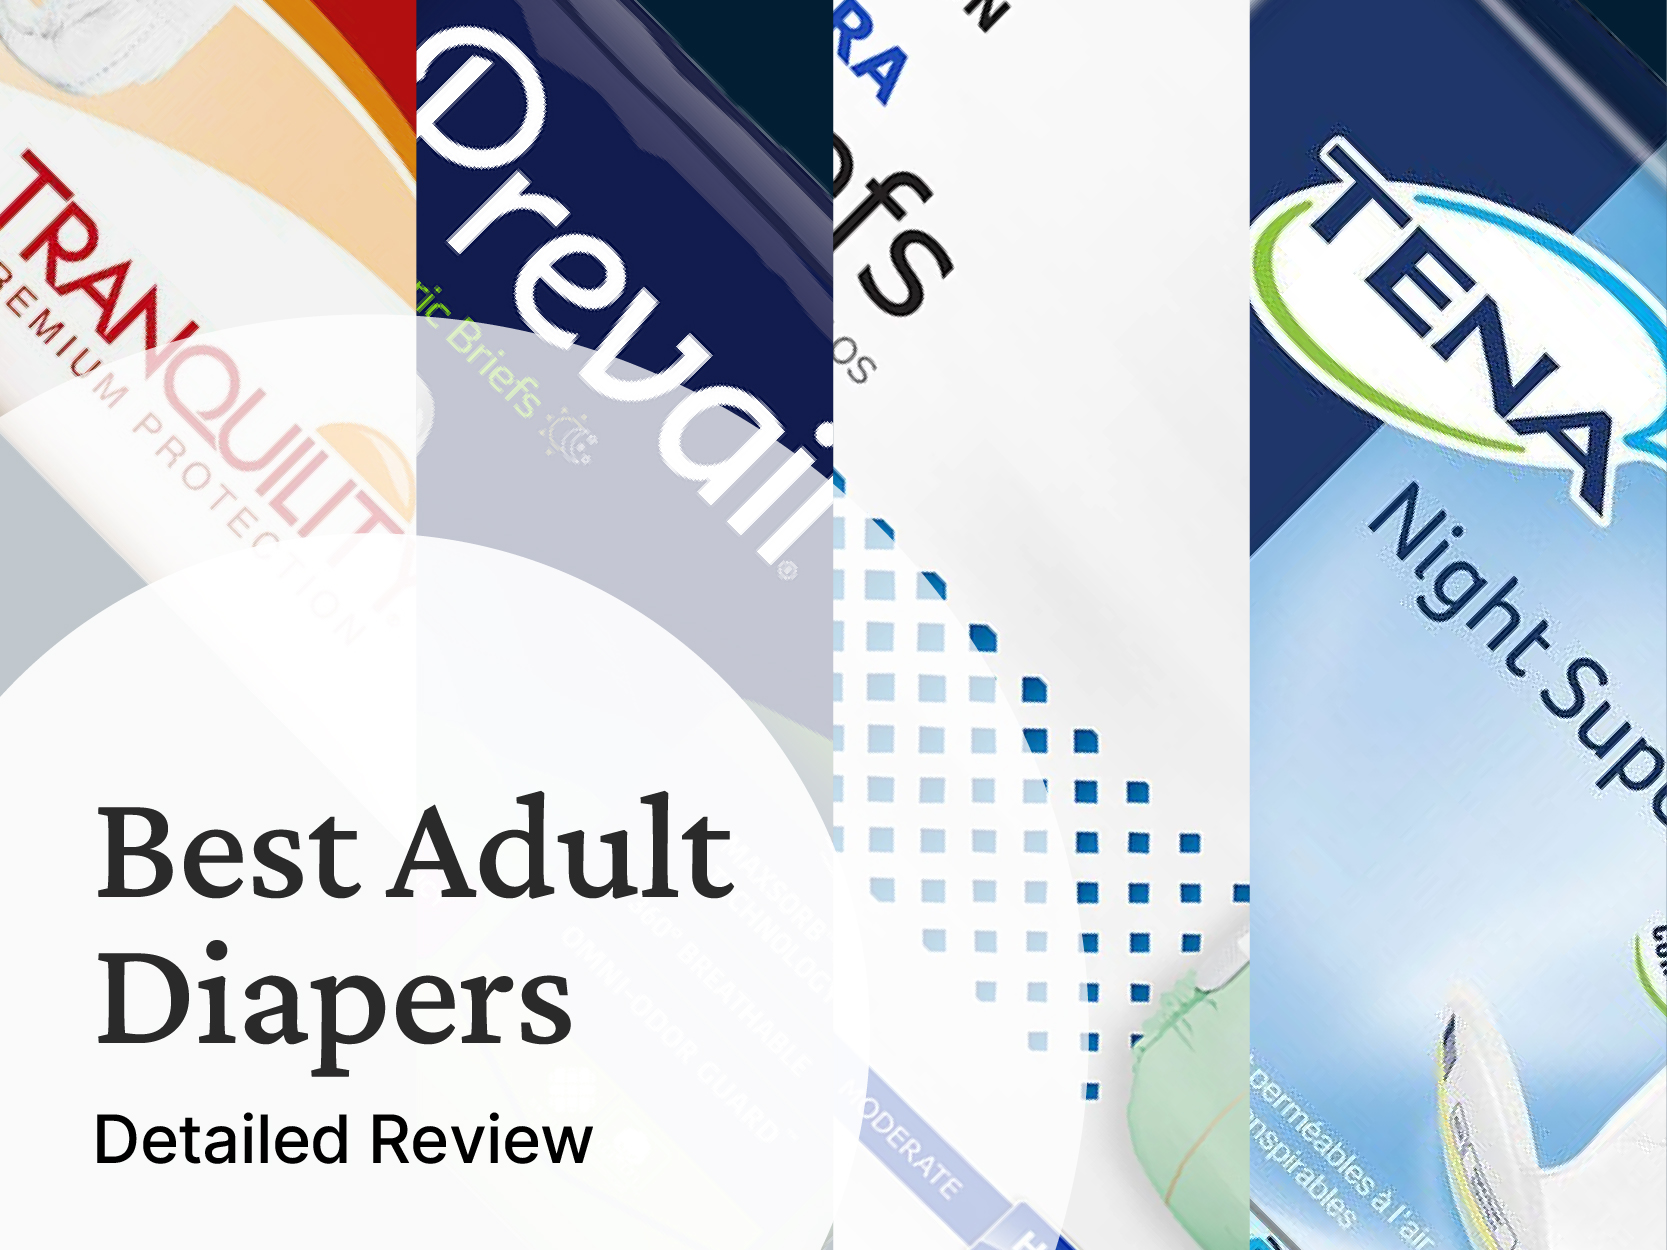 Best Adult Diapers: Top 5 Reliable Brands, According To Experts